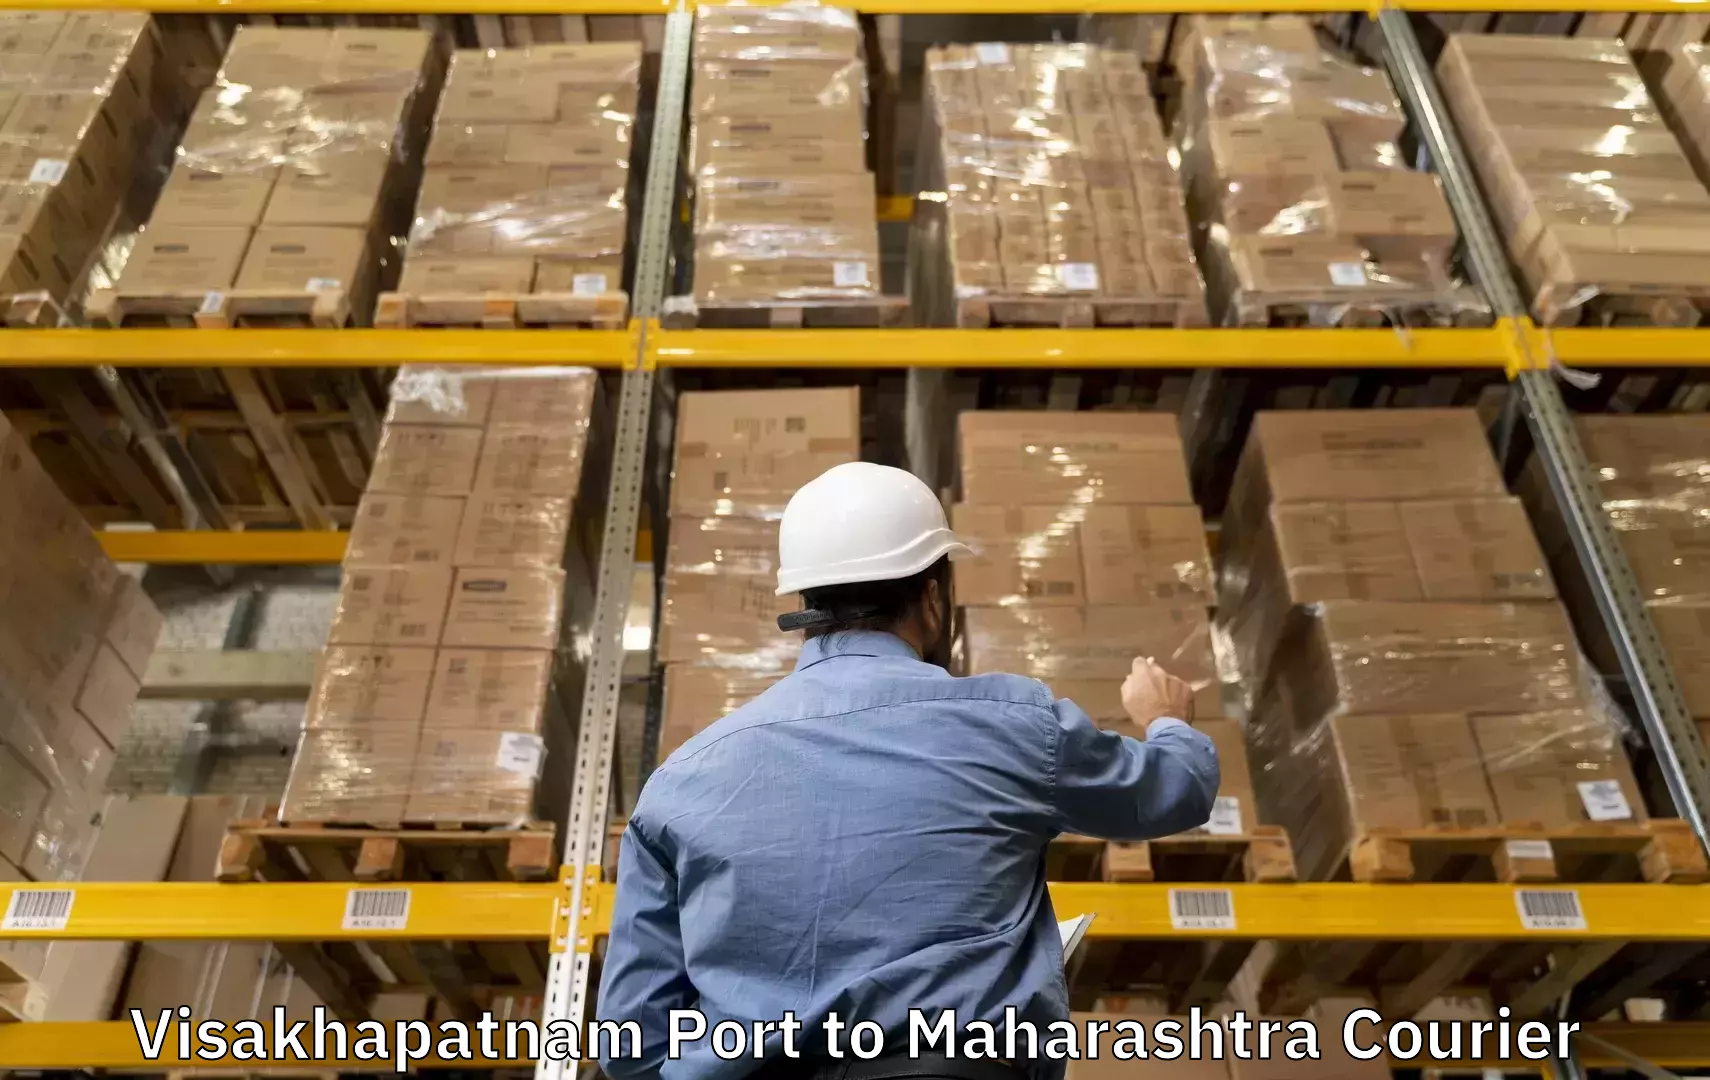 Baggage shipping experts Visakhapatnam Port to Thane